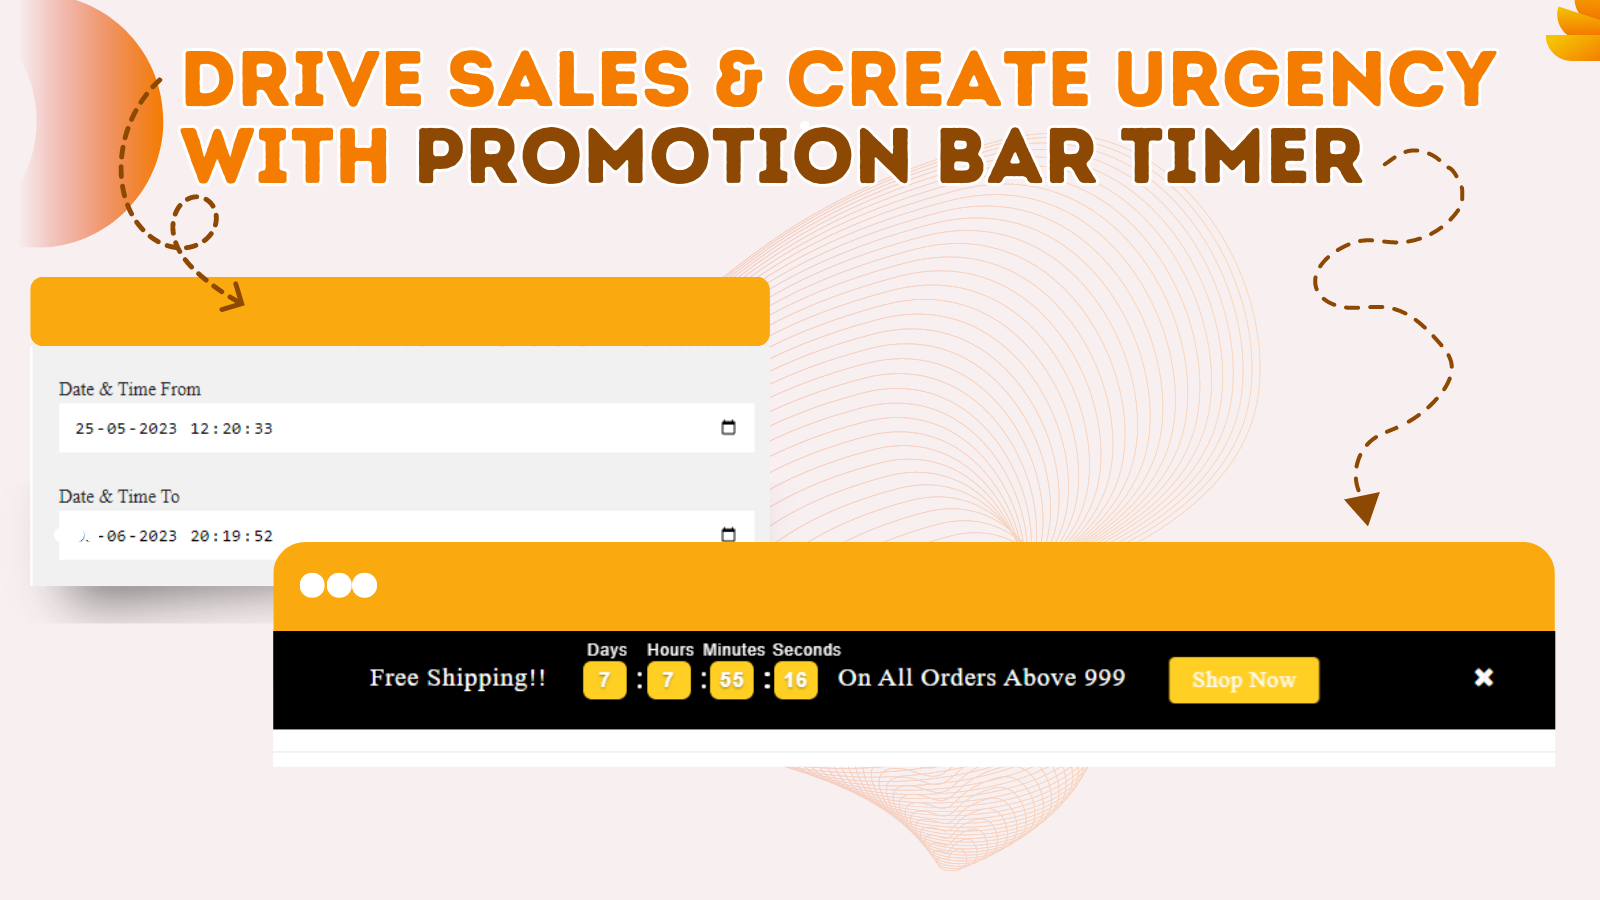  Drive Sales and Create Urgency with Promotion Bar Timer